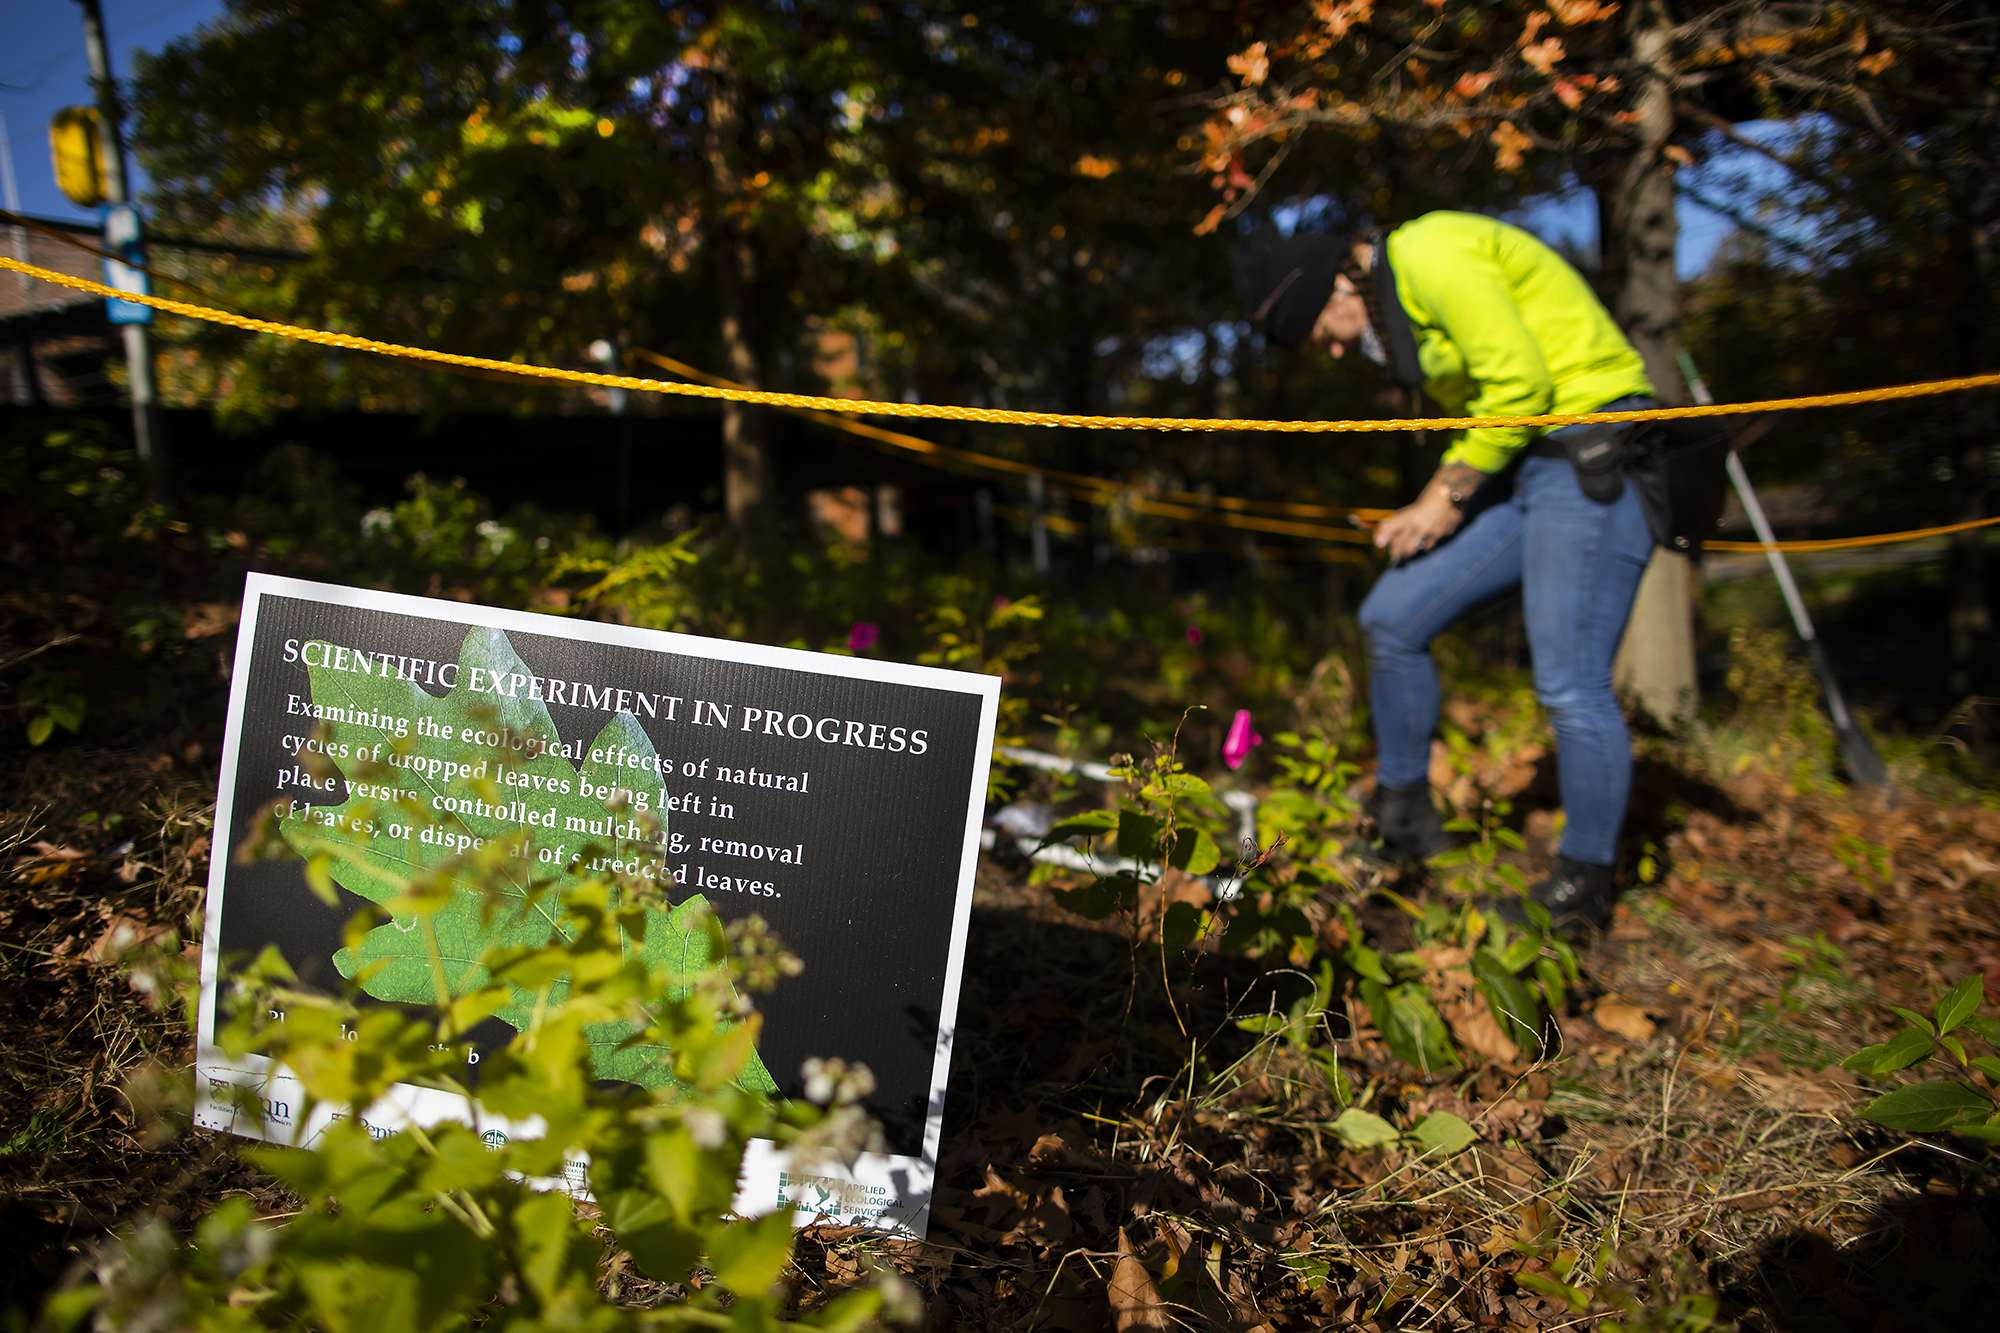 In the foreground, a sign saying "Scientific Experiment in Progress." In the background, a field scientist makes notes standing in a roped off area of land under trees.